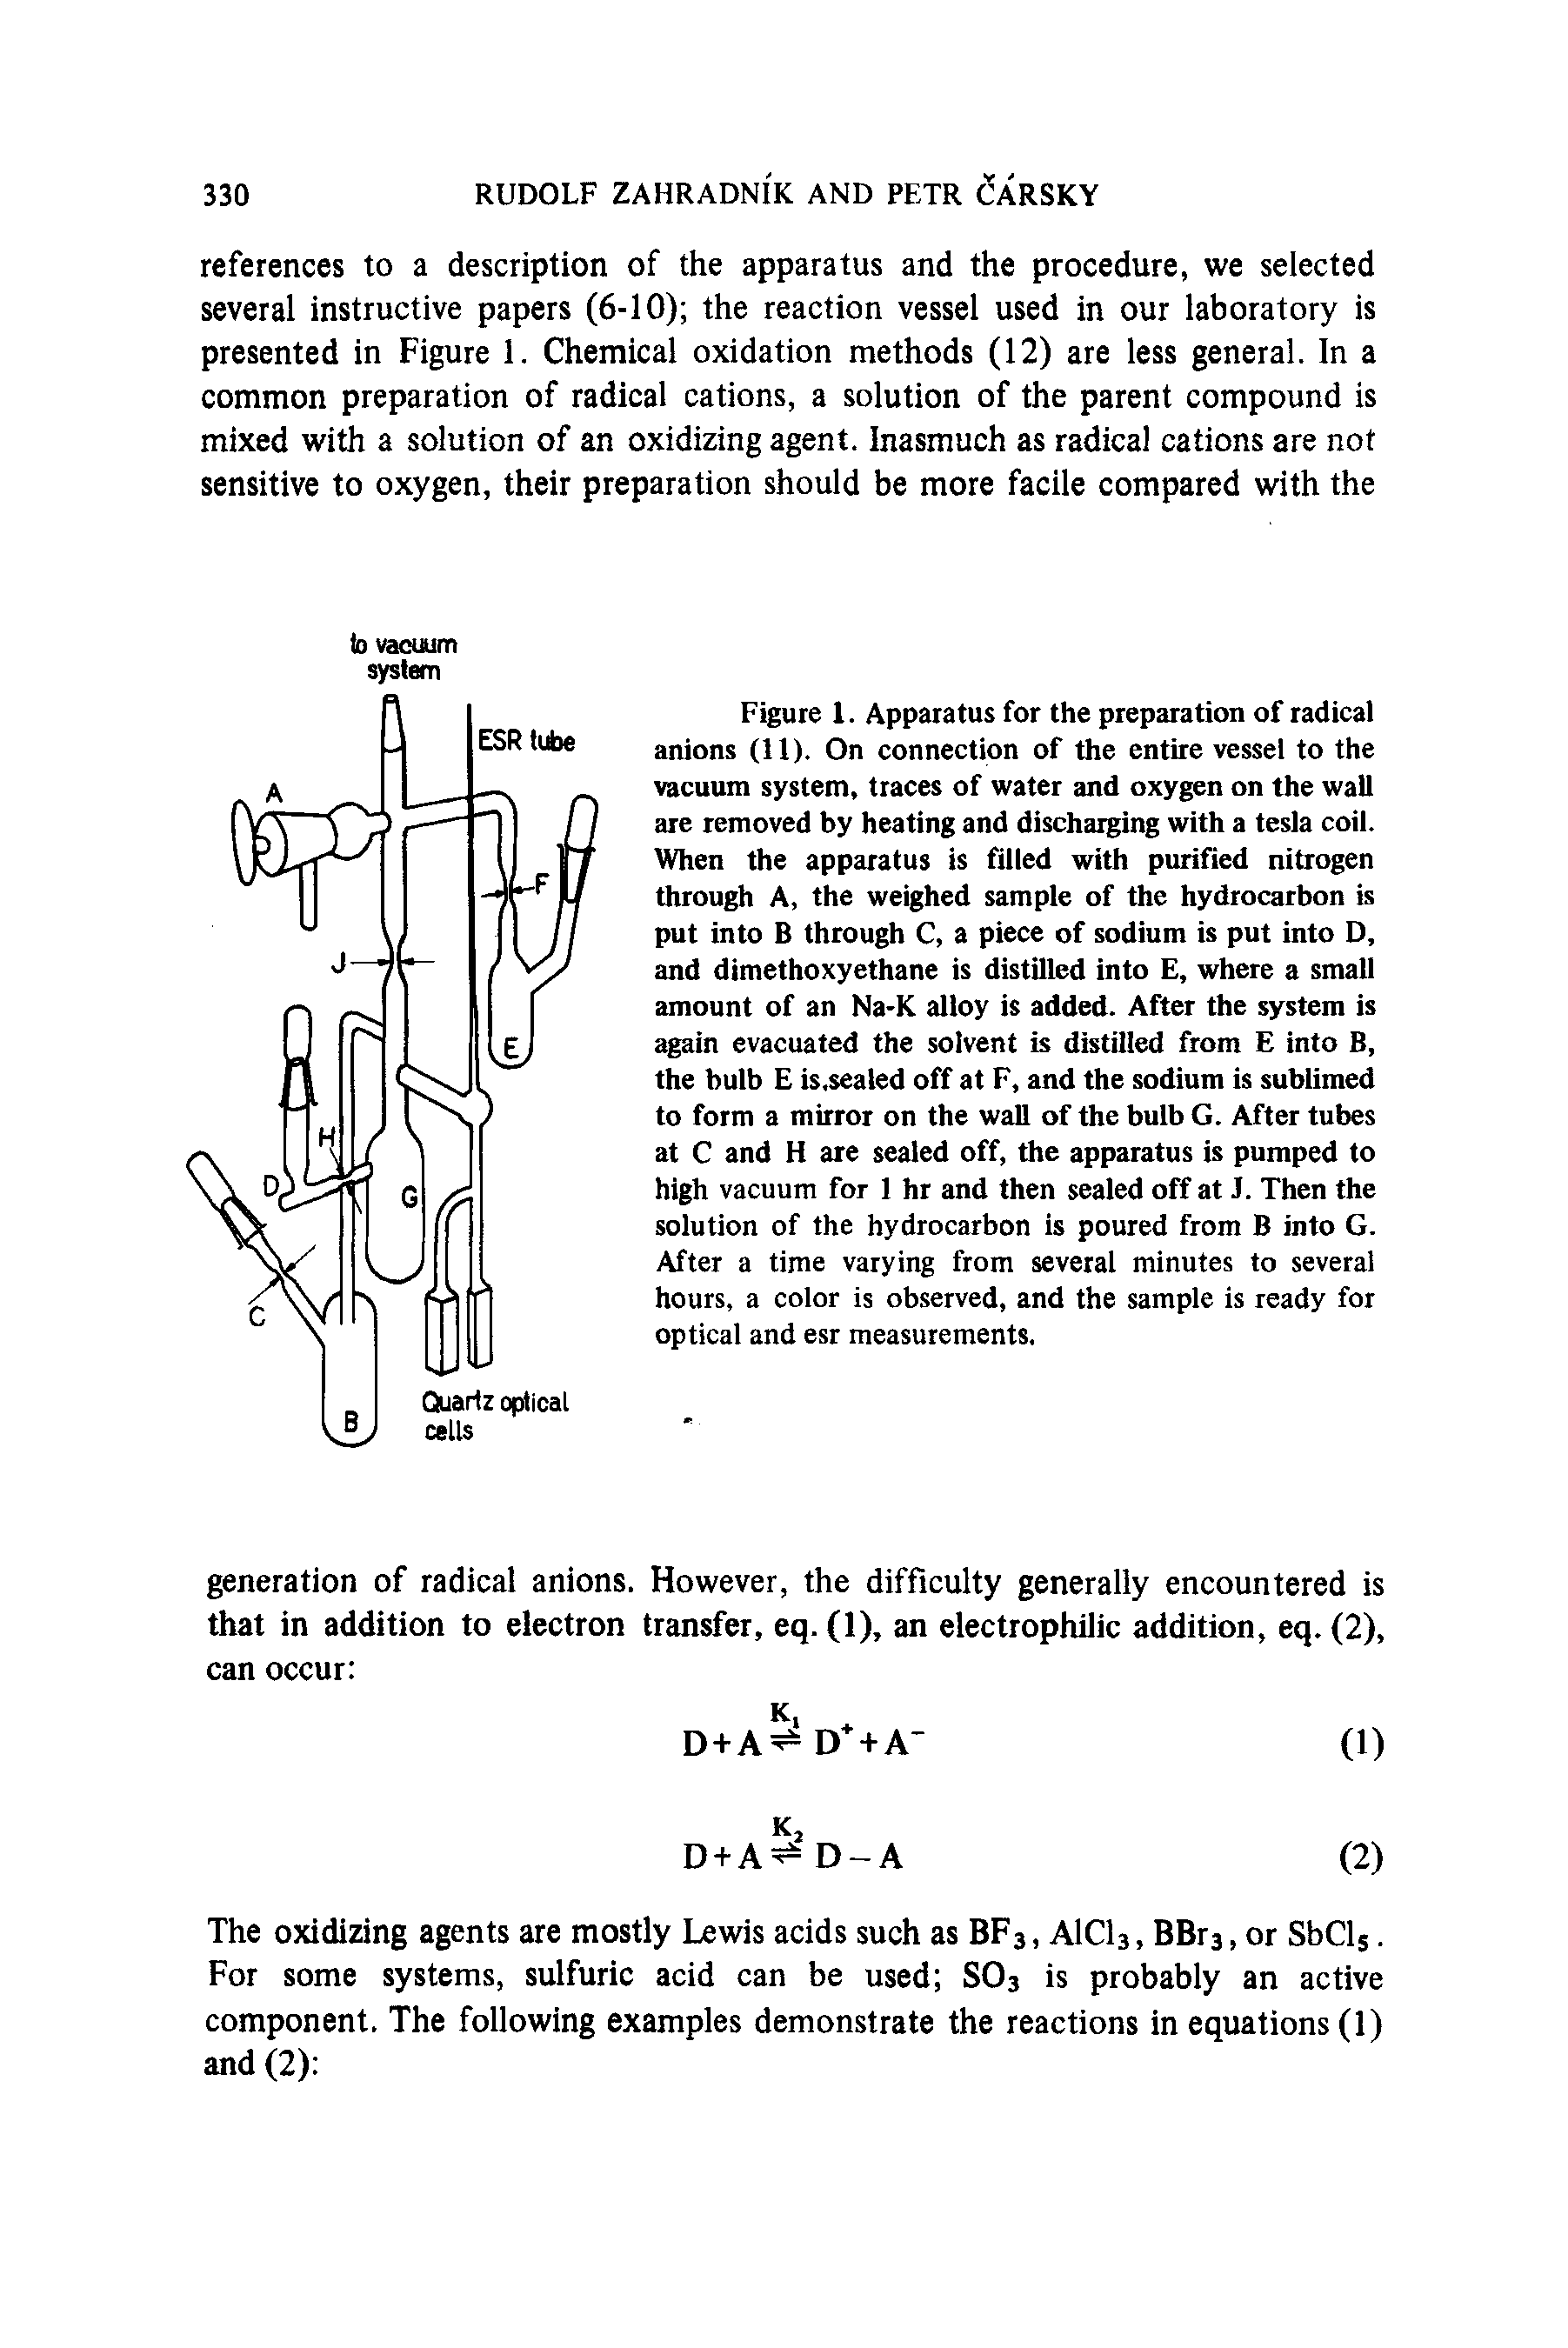 Figure 1. Apparatus for the preparation of radical anions (11). On connection of the entire vessel to the vacuum system, traces of water and oxygen on the wall are removed by heating and discharging with a tesla coil. When the apparatus is filled with purified nitrogen through A, the weighed sample of the hydrocarbon is put into B through C, a piece of sodium is put into D, and dimethoxyethane is distilled into E, where a small amount of an Na-K alloy is added. After the system is again evacuated the solvent is distilled from E into B, the bulb E is,sealed off at F, and the sodium is sublimed to form a mirror on the wall of the bulb G. After tubes at C and H are sealed off, the apparatus is pumped to high vacuum for 1 hr and then sealed off at J. Then the solution of the hydrocarbon is poured from B into G. After a time varying from several minutes to several hours, a color is observed, and the sample is ready for optical and esr measurements.